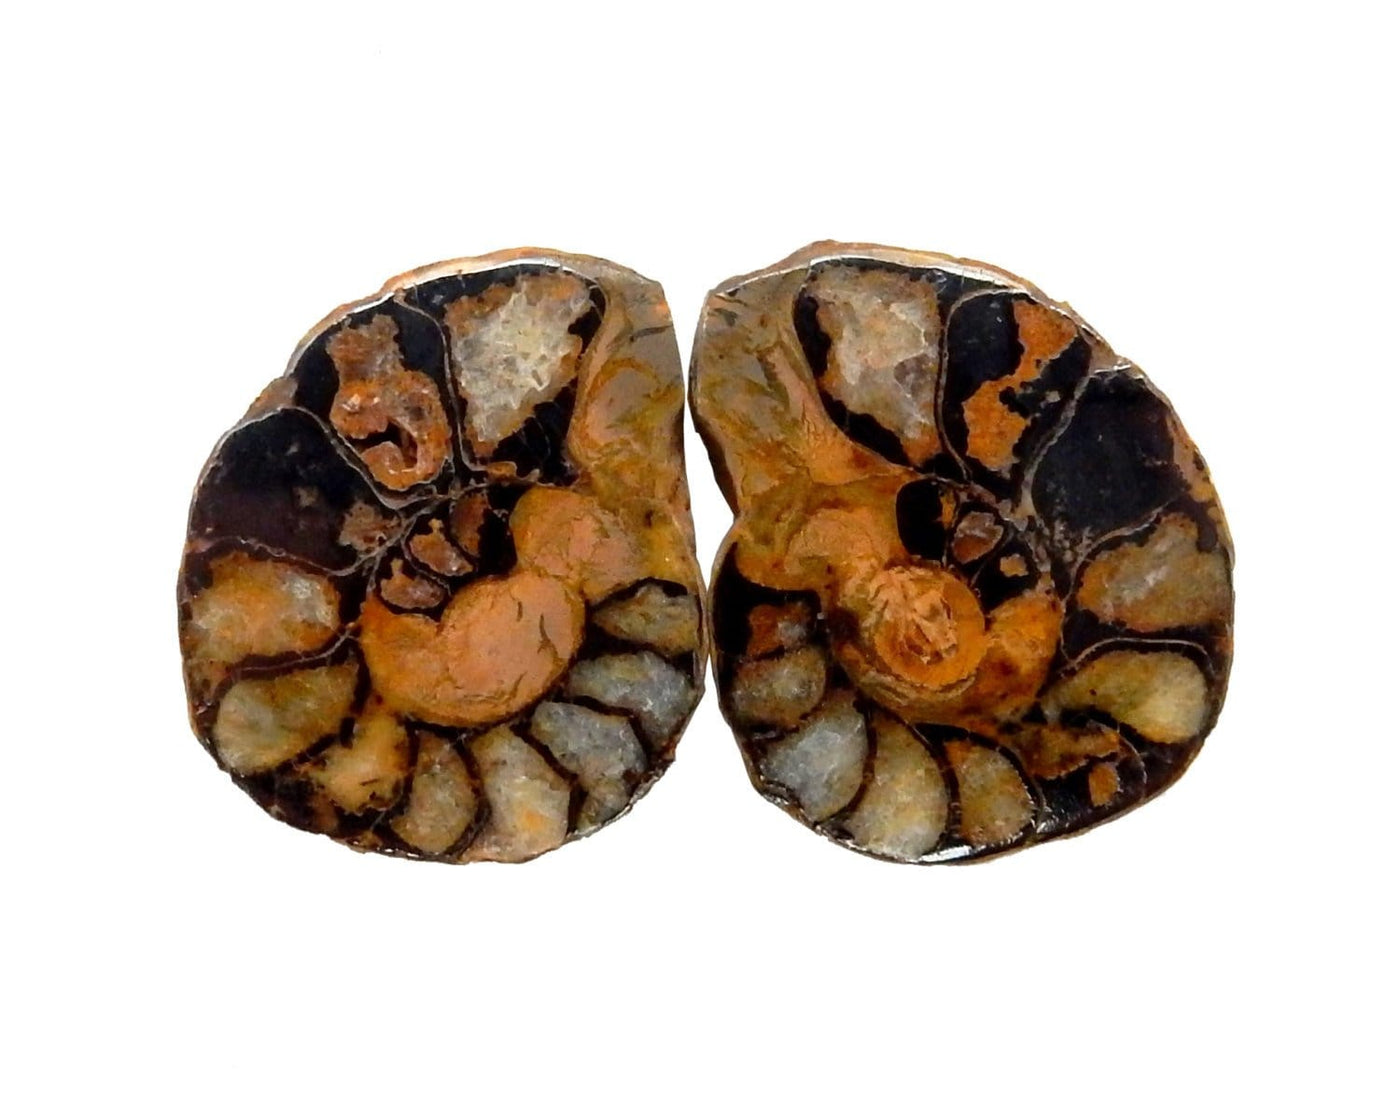 Ammonite fossil pair on a white background.